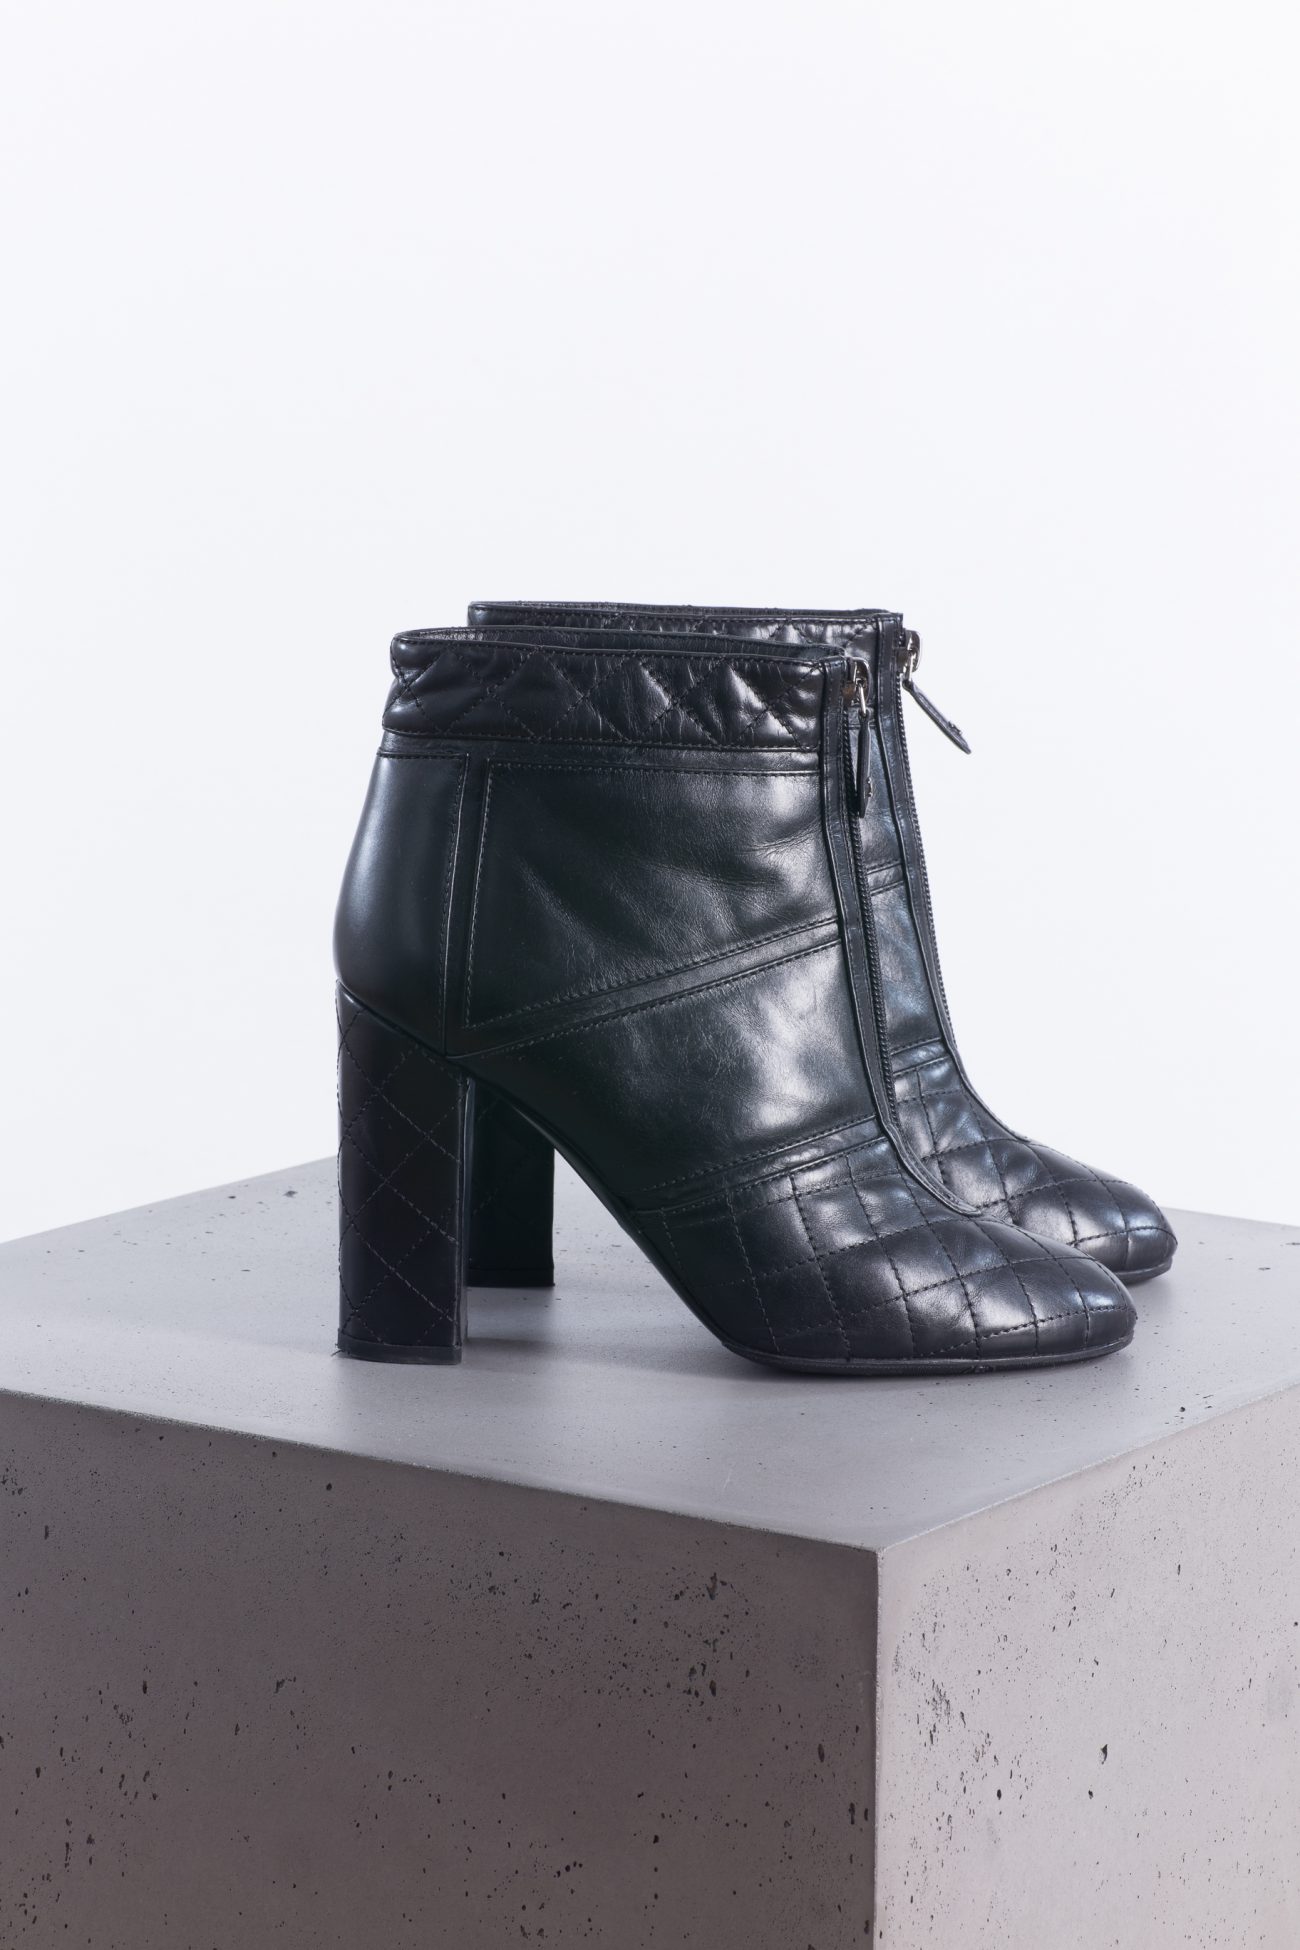 Chanel Boots, 39 - Huntessa Luxury Online Consignment Boutique